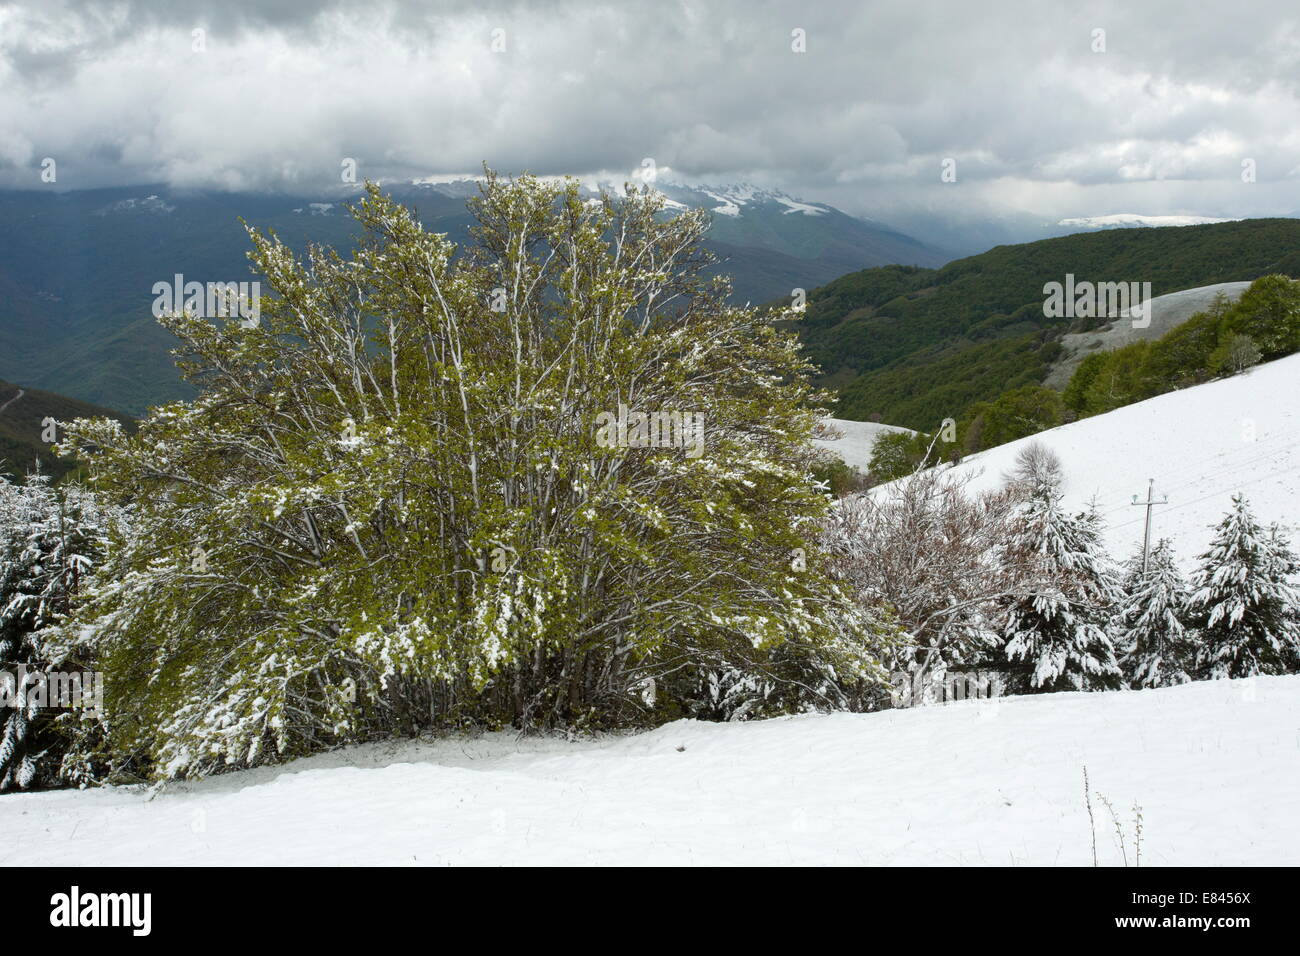 Snowy scene with beech trees in Monti Sibillini National Park, Italy. Stock Photo